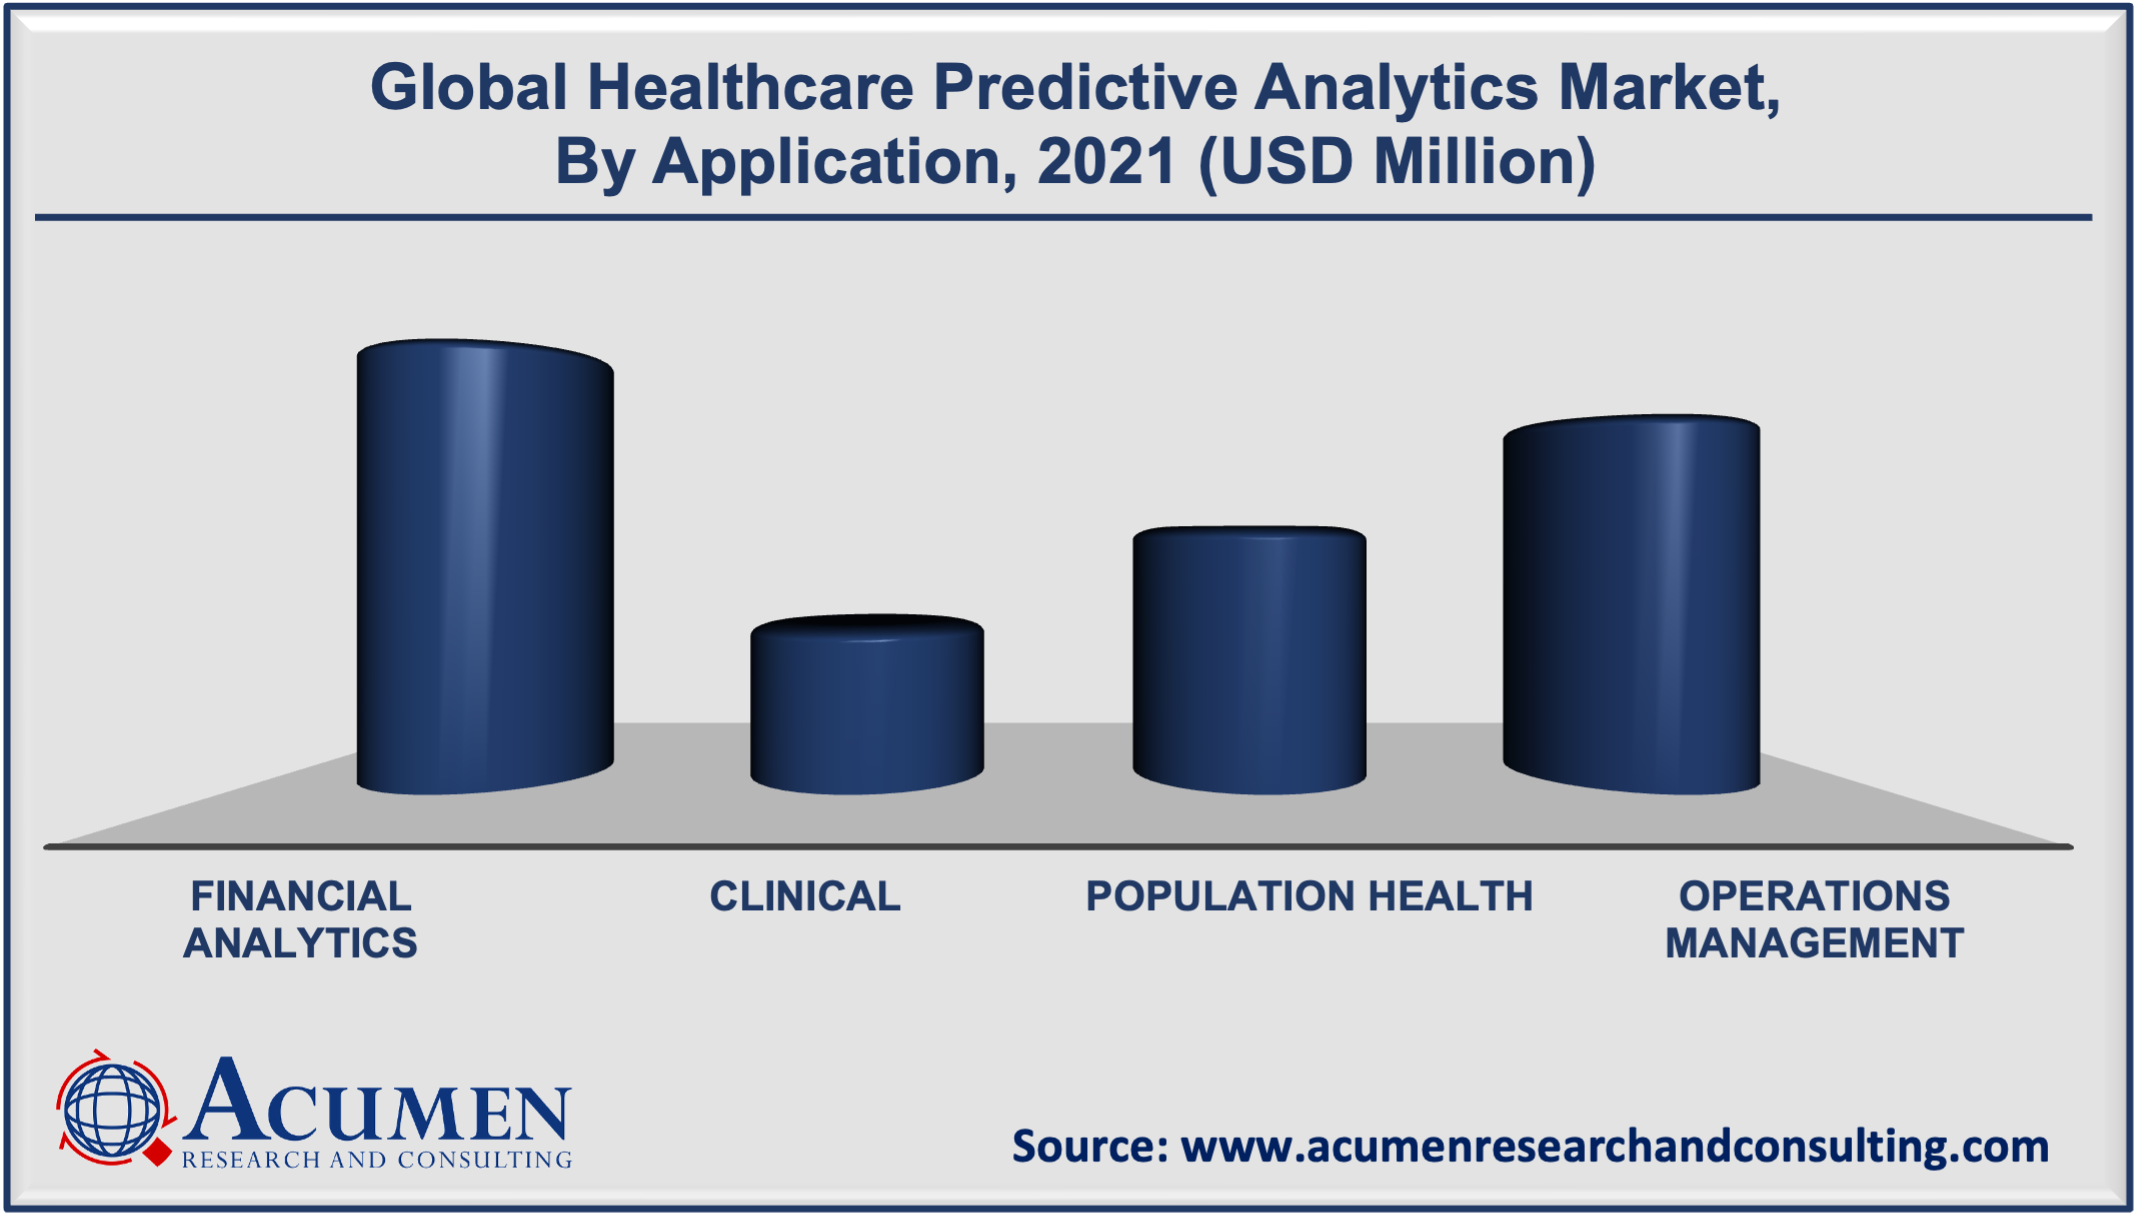 Healthcare Predictive Analytics Market By Application is estimated to reach USD 87,494 Million by 2030, at a CAGR of 28.2%